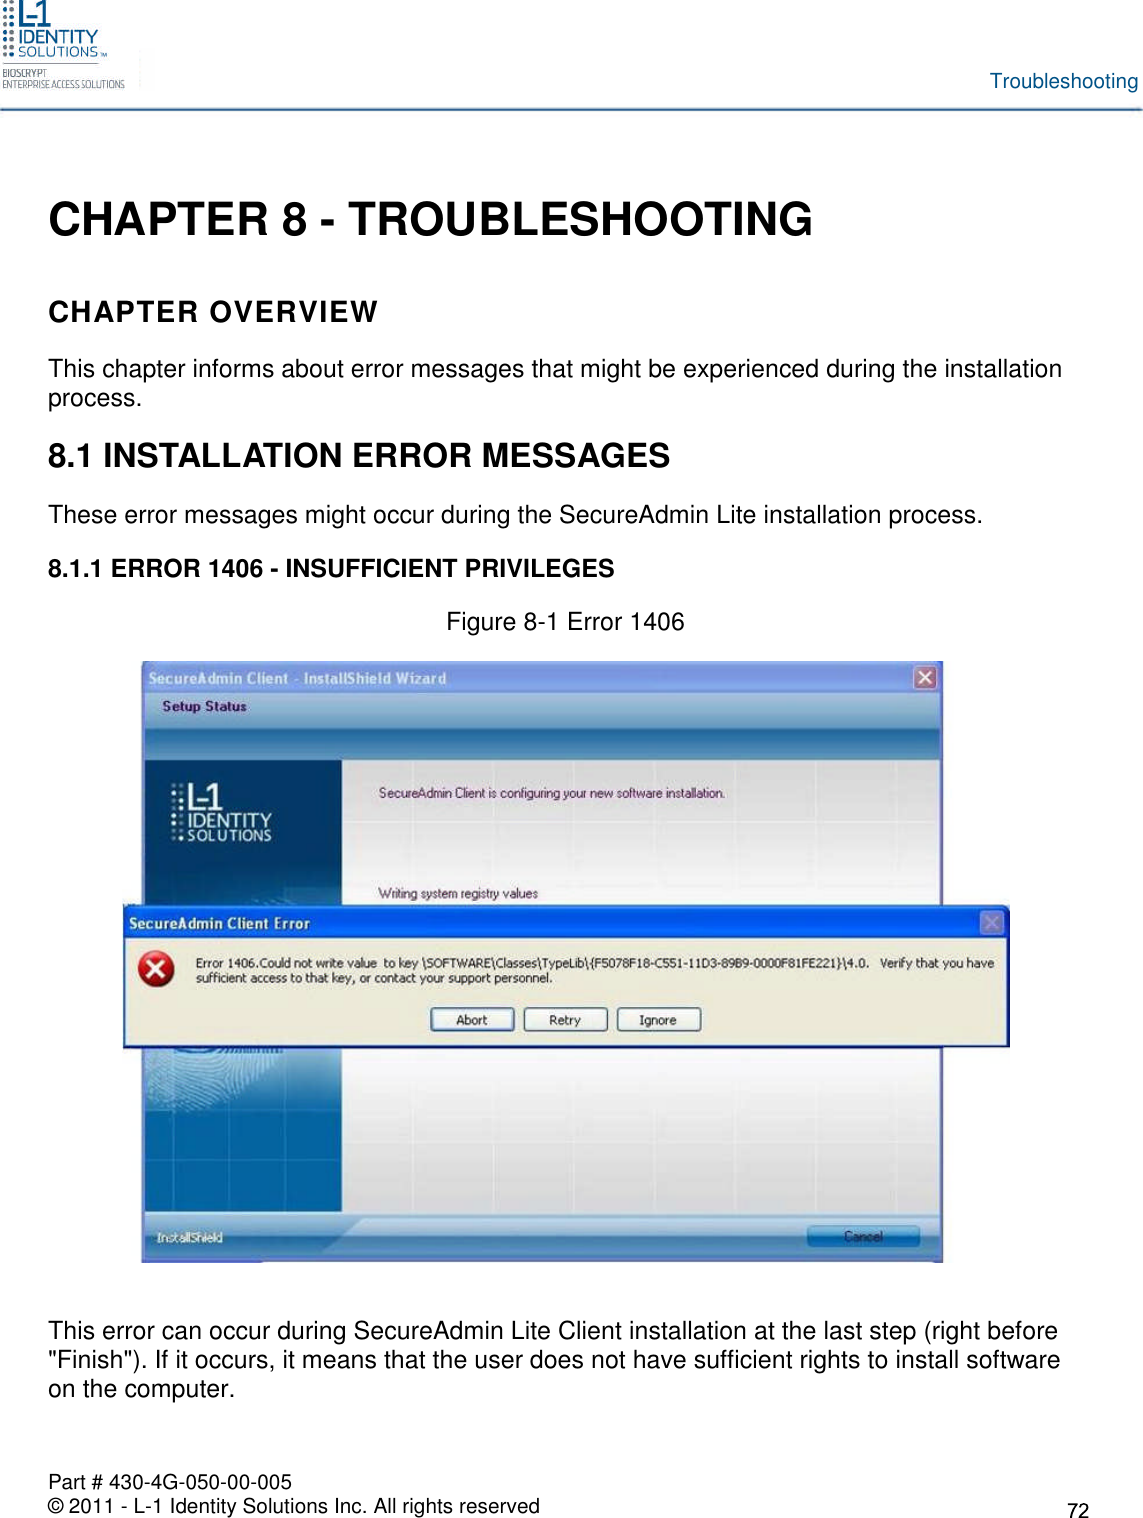 Part # 430-4G-050-00-005© 2011 - L-1 Identity Solutions Inc. All rights reservedTroubleshootingCHAPTER 8 - TROUBLESHOOTINGCHAPTER OVERVIEWThis chapter informs about error messages that might be experienced during the installationprocess.8.1 INSTALLATION ERROR MESSAGESThese error messages might occur during the SecureAdmin Lite installation process.8.1.1 ERROR 1406 - INSUFFICIENT PRIVILEGESFigure 8-1 Error 1406This error can occur during SecureAdmin Lite Client installation at the last step (right before&quot;Finish&quot;). If it occurs, it means that the user does not have sufficient rights to install softwareon the computer.